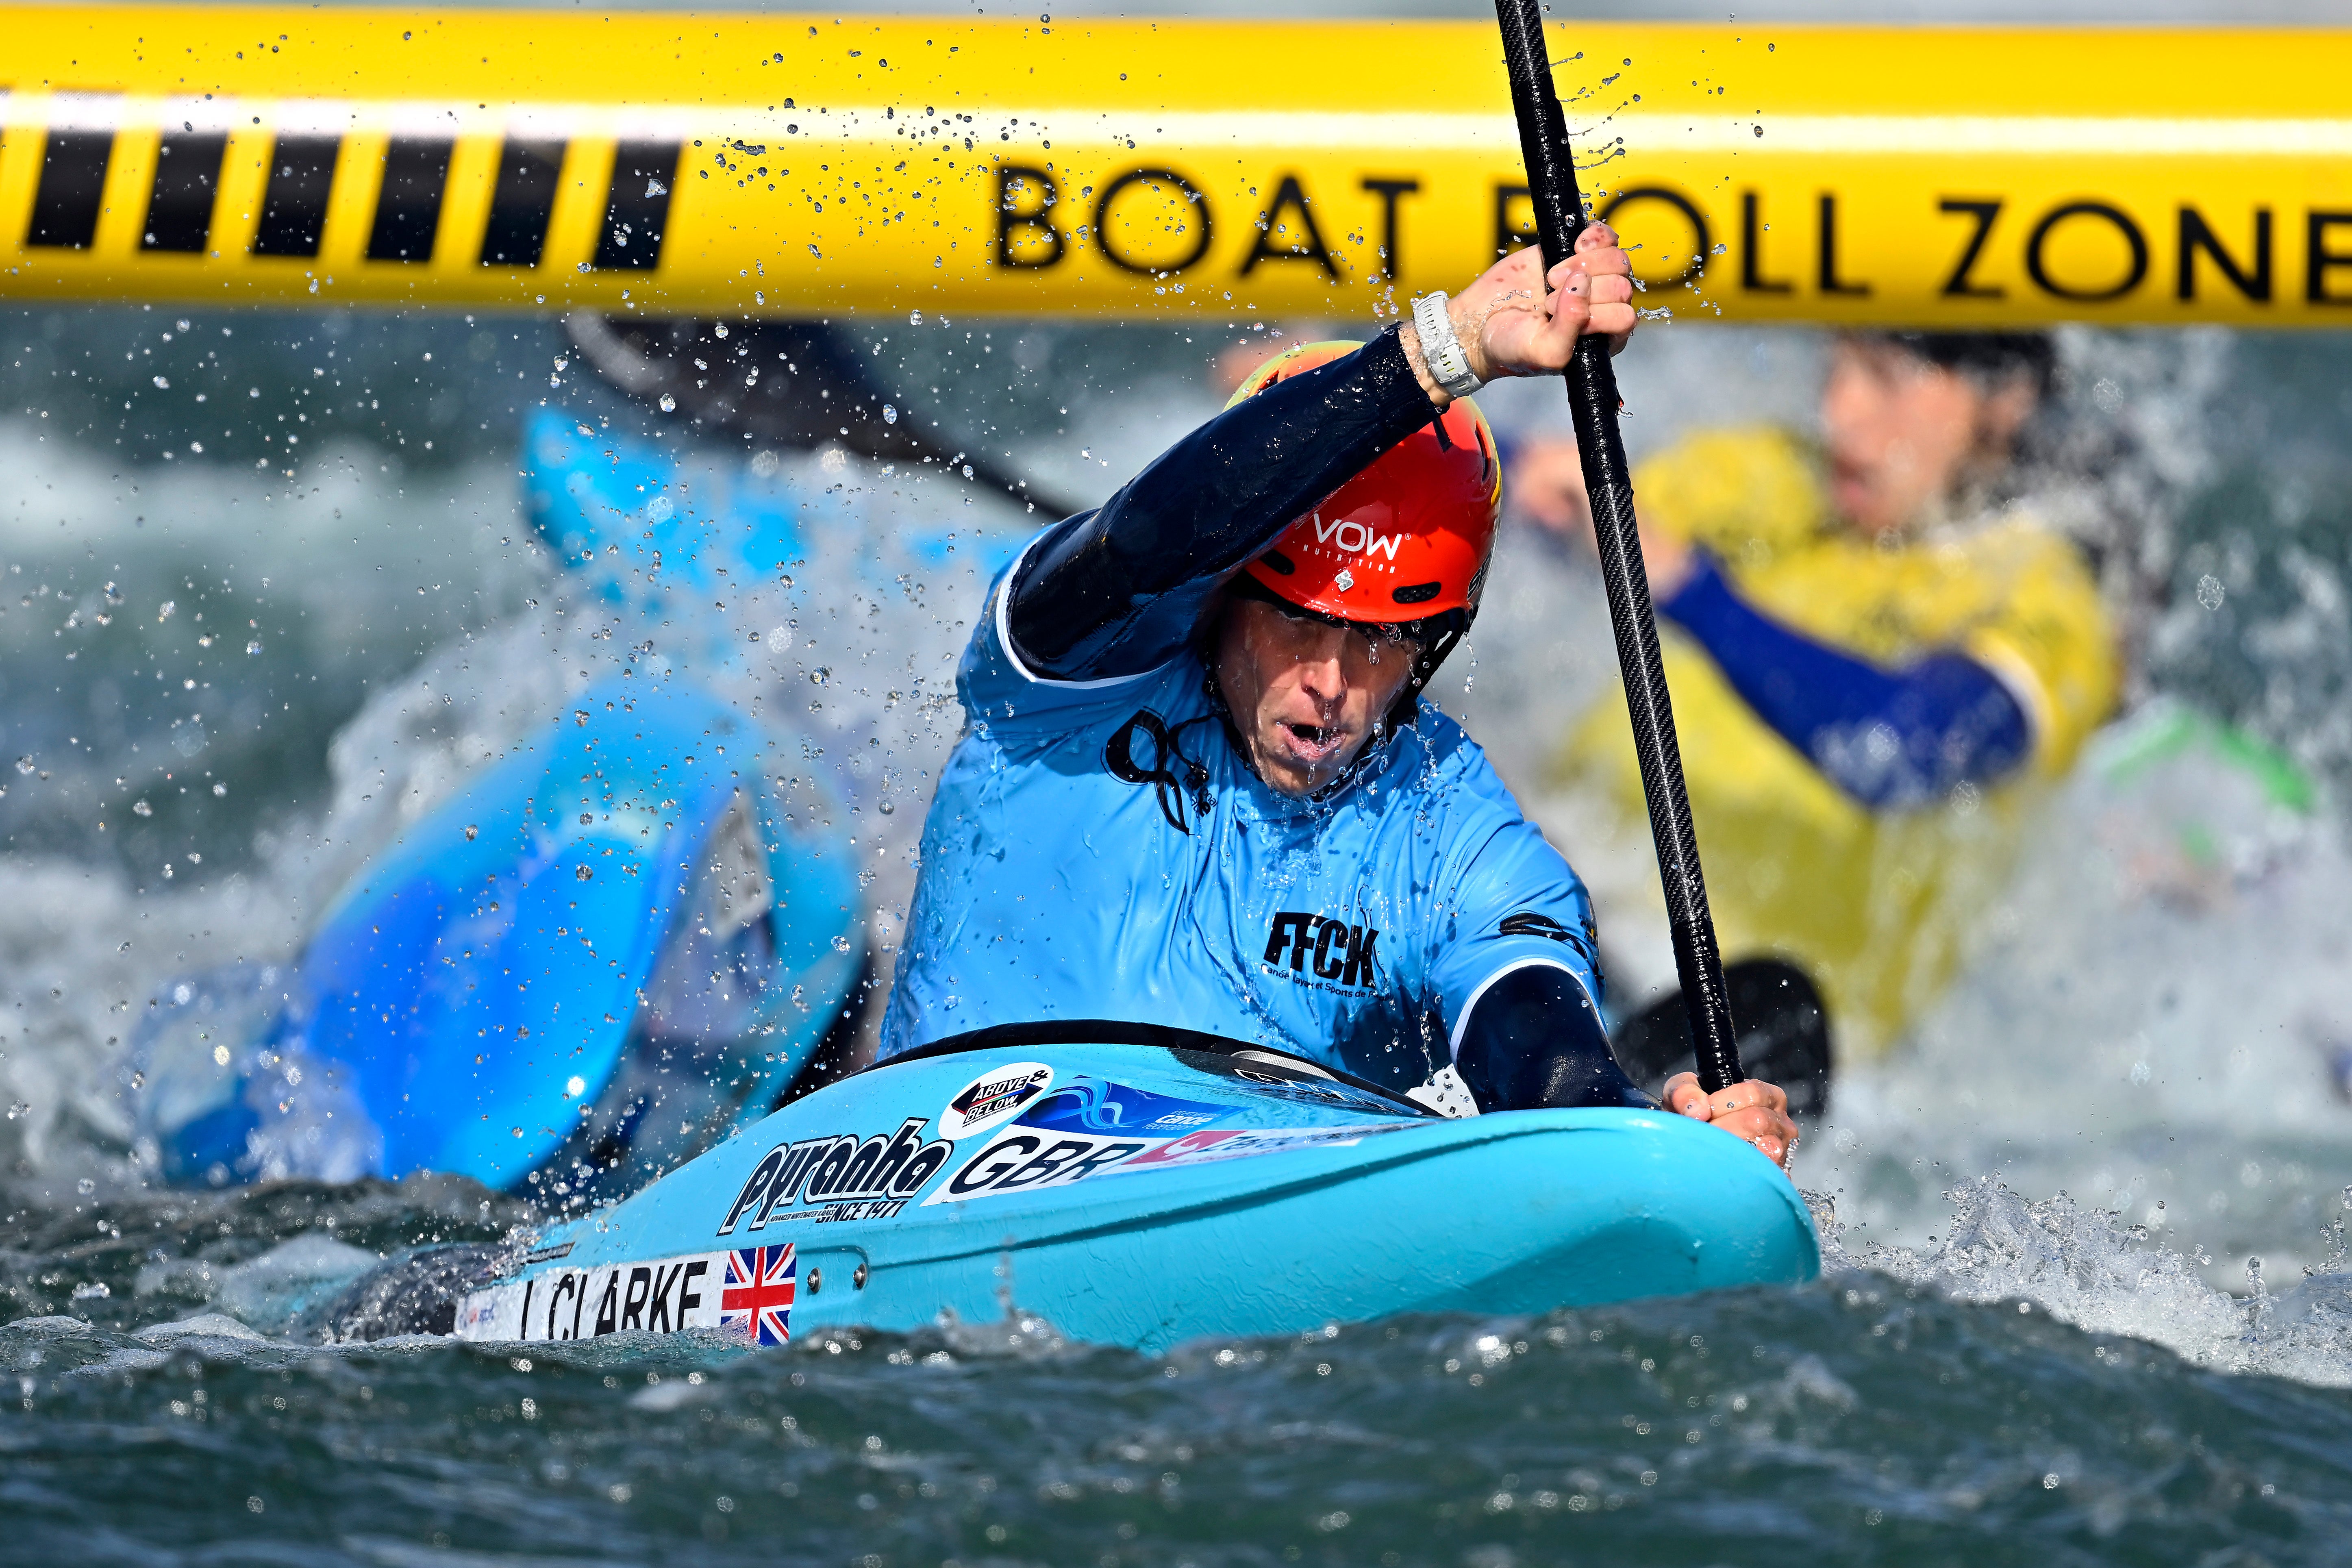 Joe Clarke of Great Britain competes in the Men’s Kayak Cross at the 2023 ICF Canoe Slalom World Cup slalom at Vaires-Sur-Marne Nautical Stadium